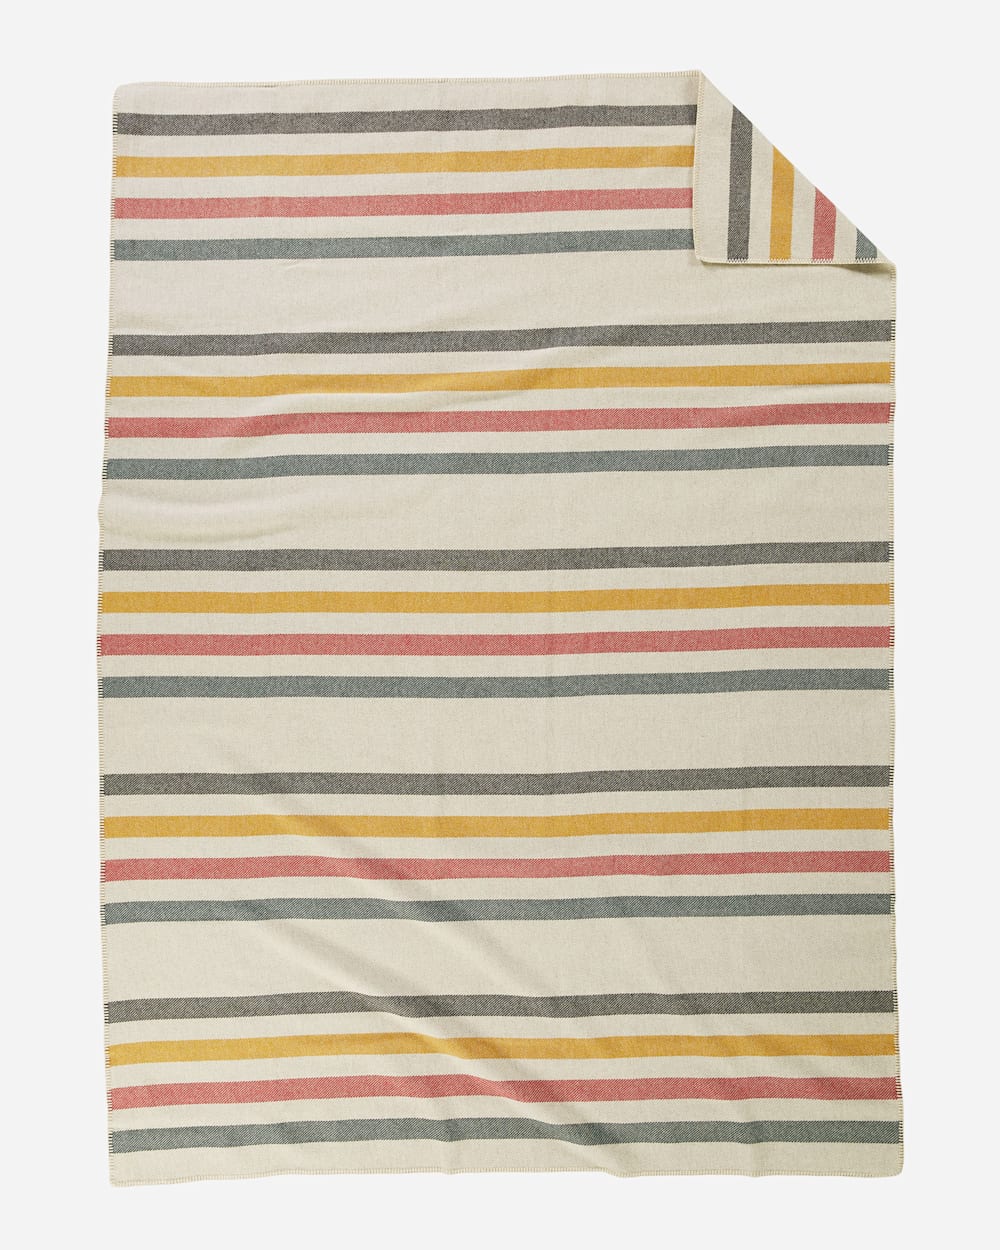 ECO-WISE WOOL PLAID/STRIPE BLANKET IN GLACIER PARK WHITE LAYING FLAT image number 2